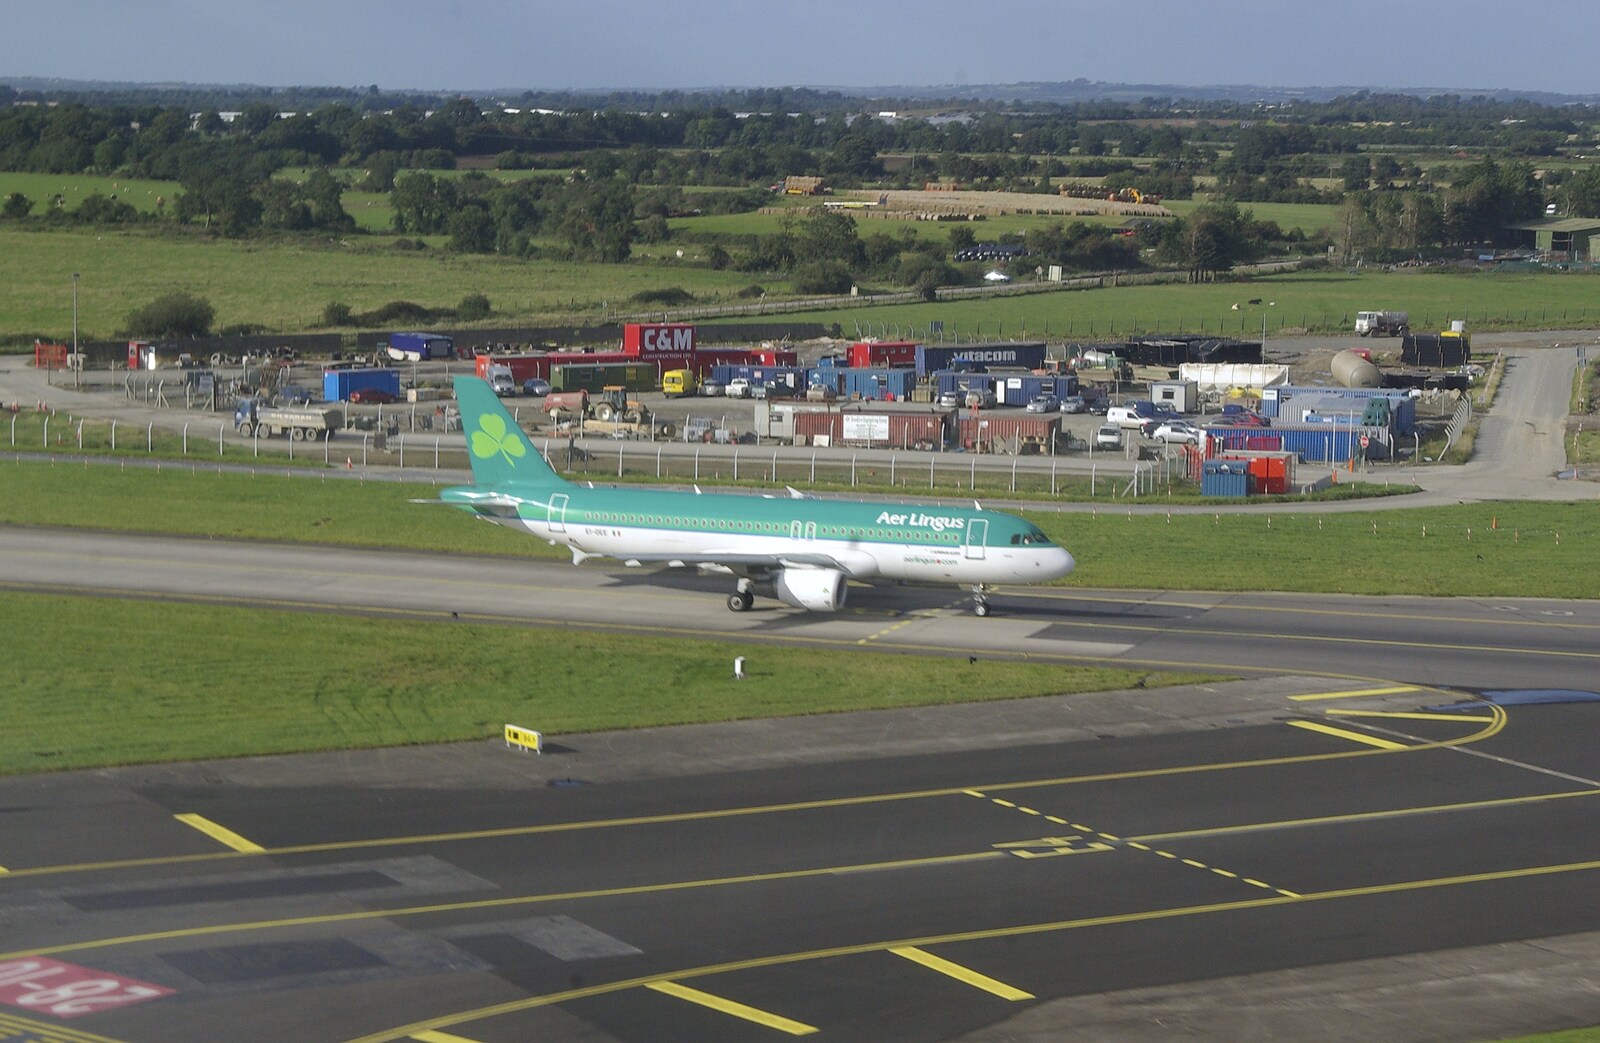 Blackrock and Dublin, Ireland - 24th September 2007: As we take off, an Aer Lingus taxis along to the gate